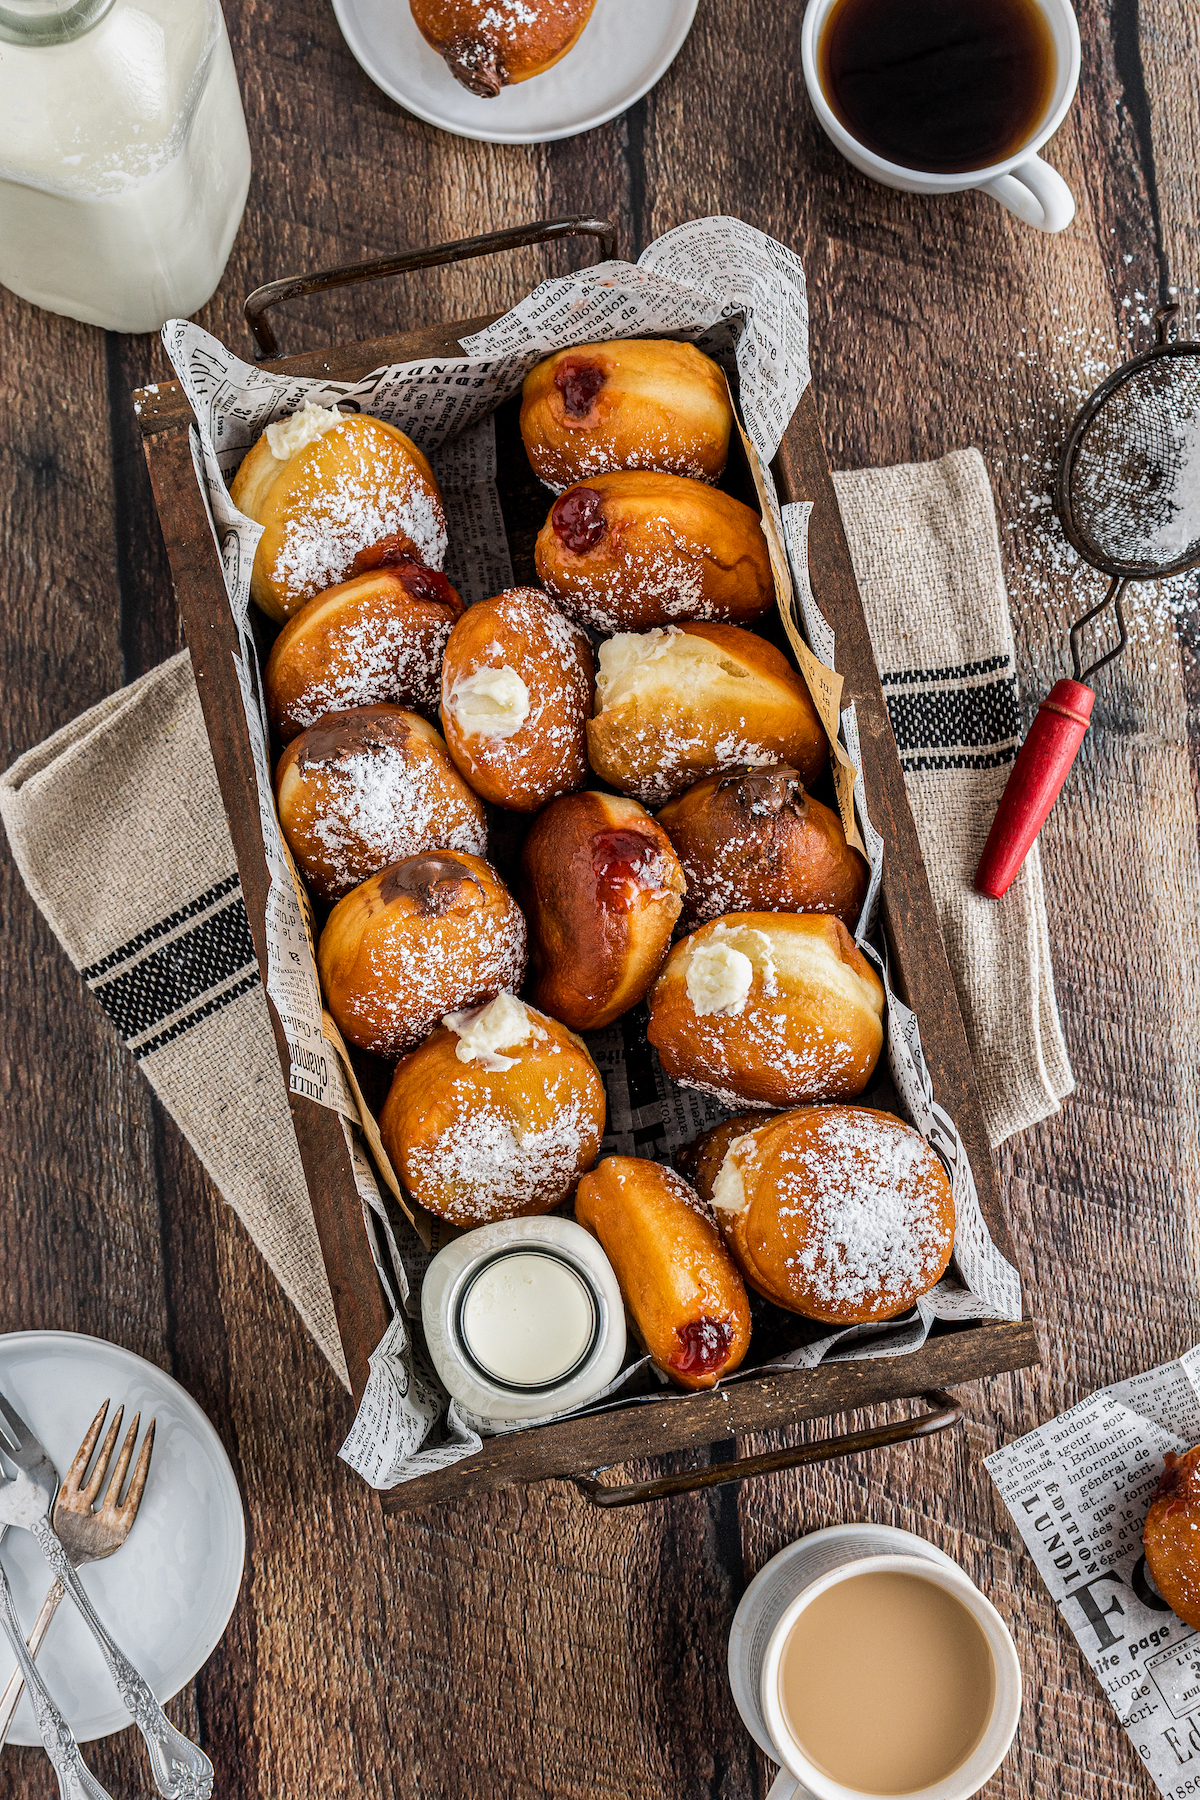 A rustic tray full of donuts, set on a wooden table, surrounded by coffee cups, saucers, napkins, powdered sugar, and a sieve.